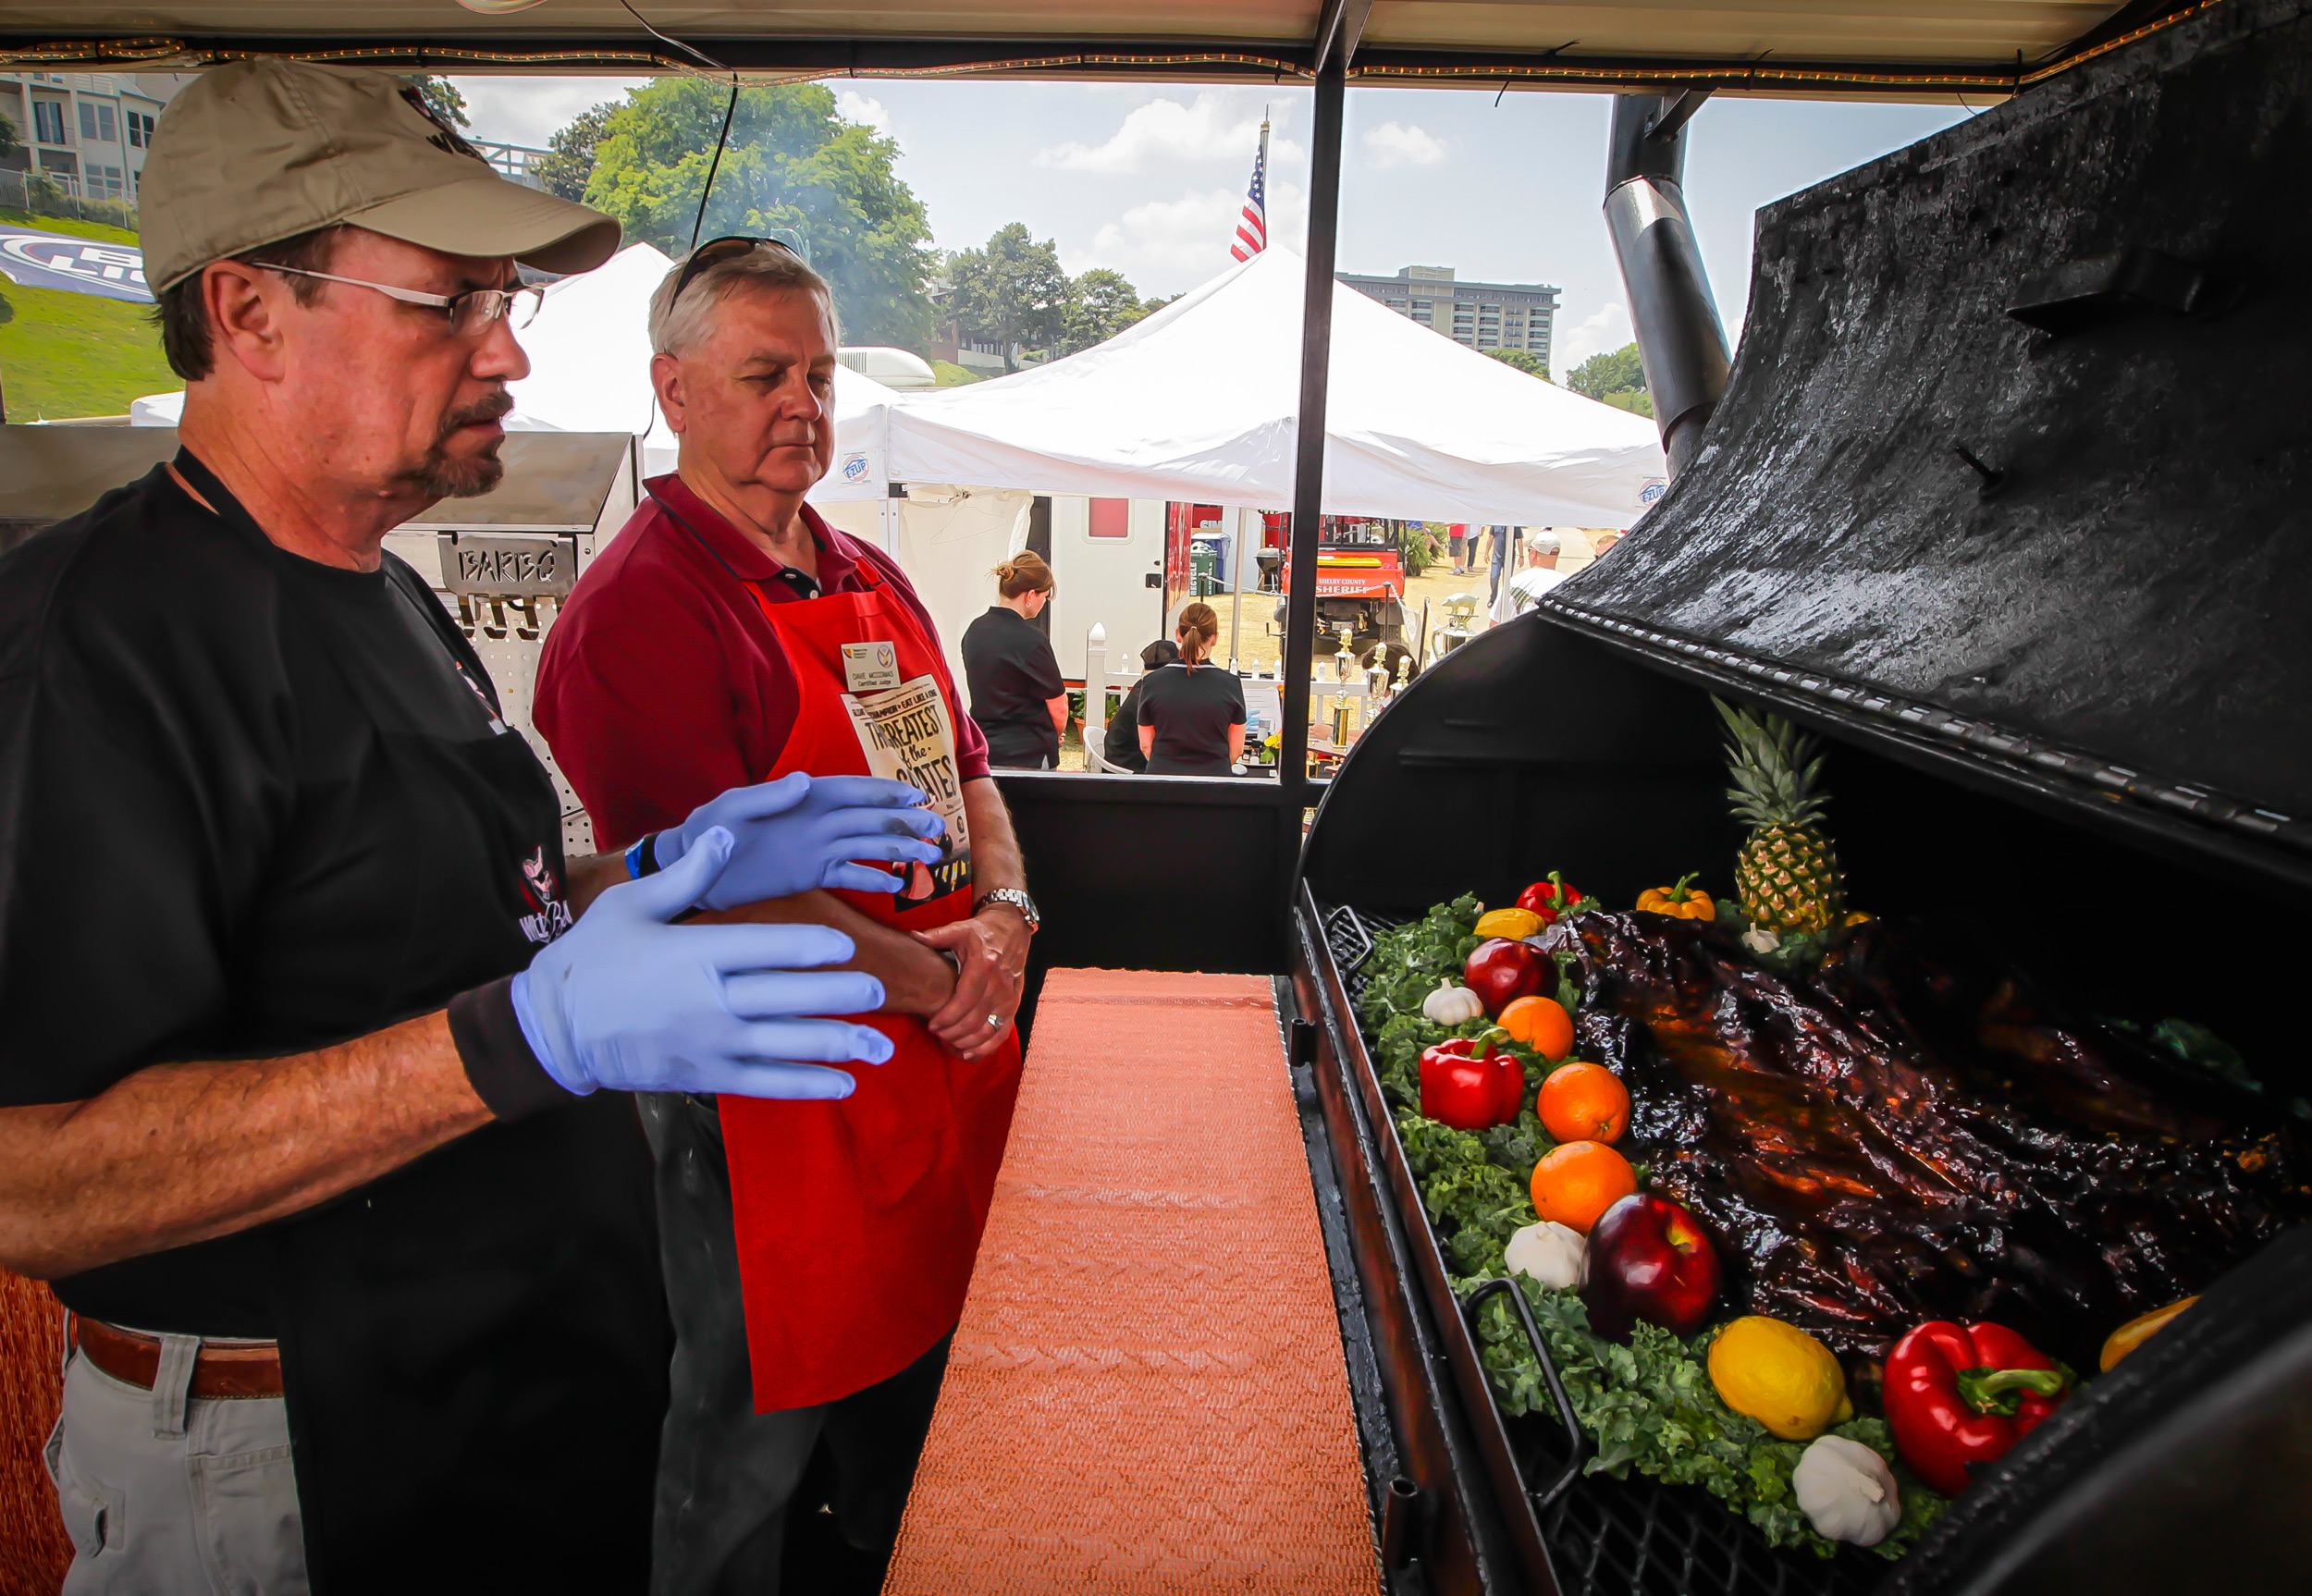 Barbecue competitor discusses his whole hog cooking method with a Memphis in May BBQ judge